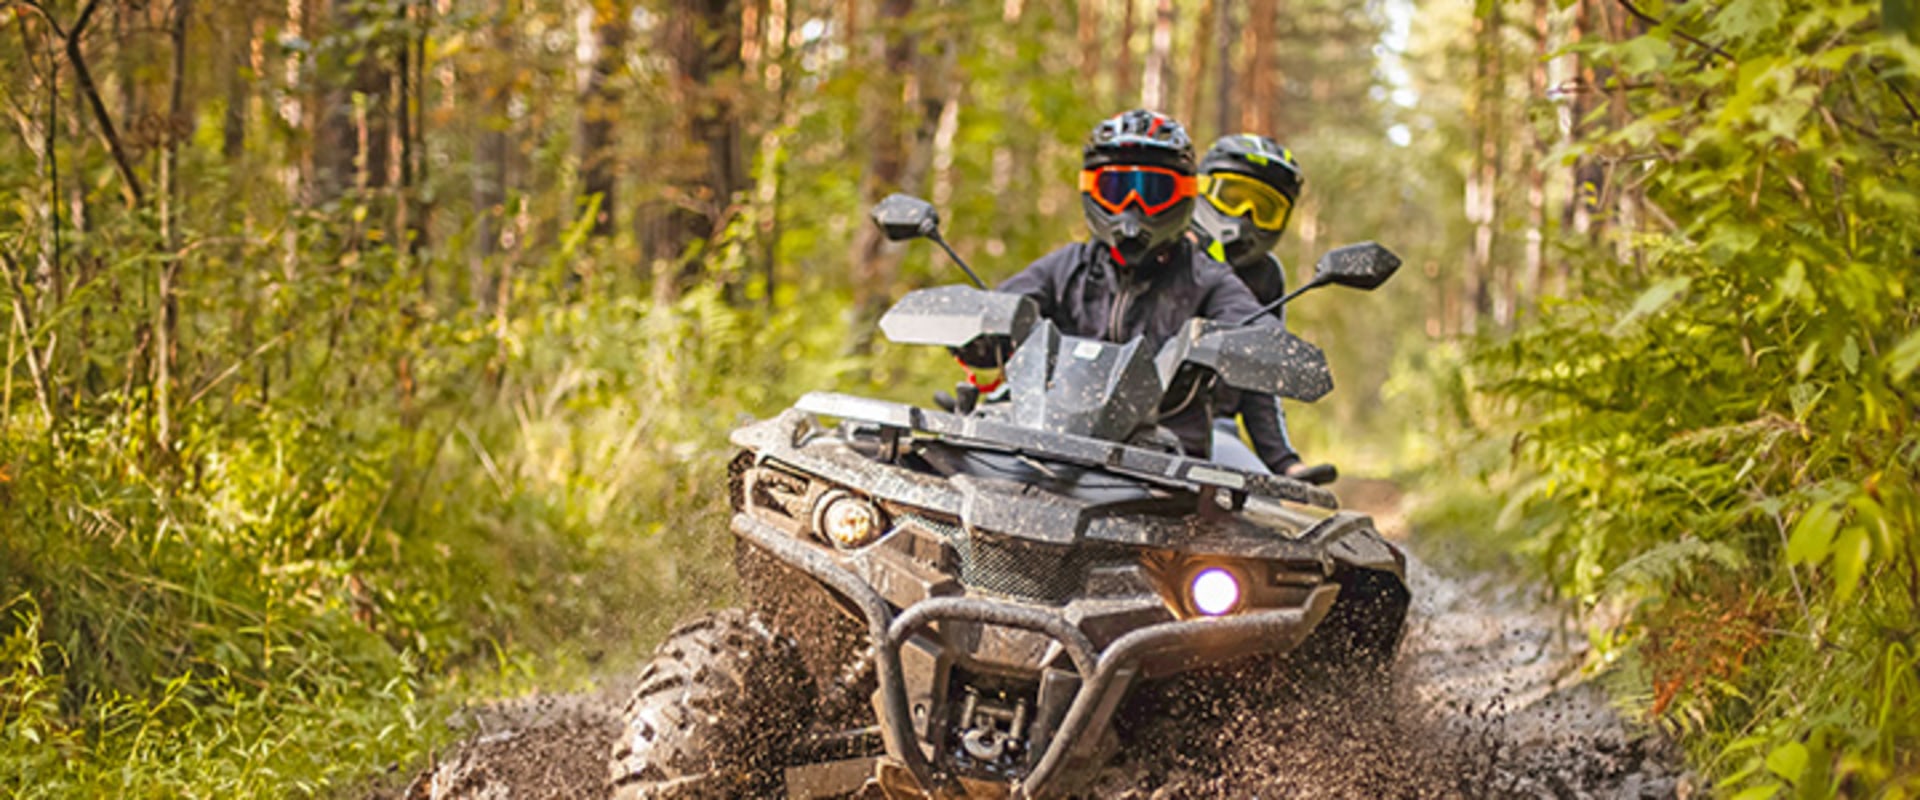 New York's Best Offroad Parks For Adventure-Seekers